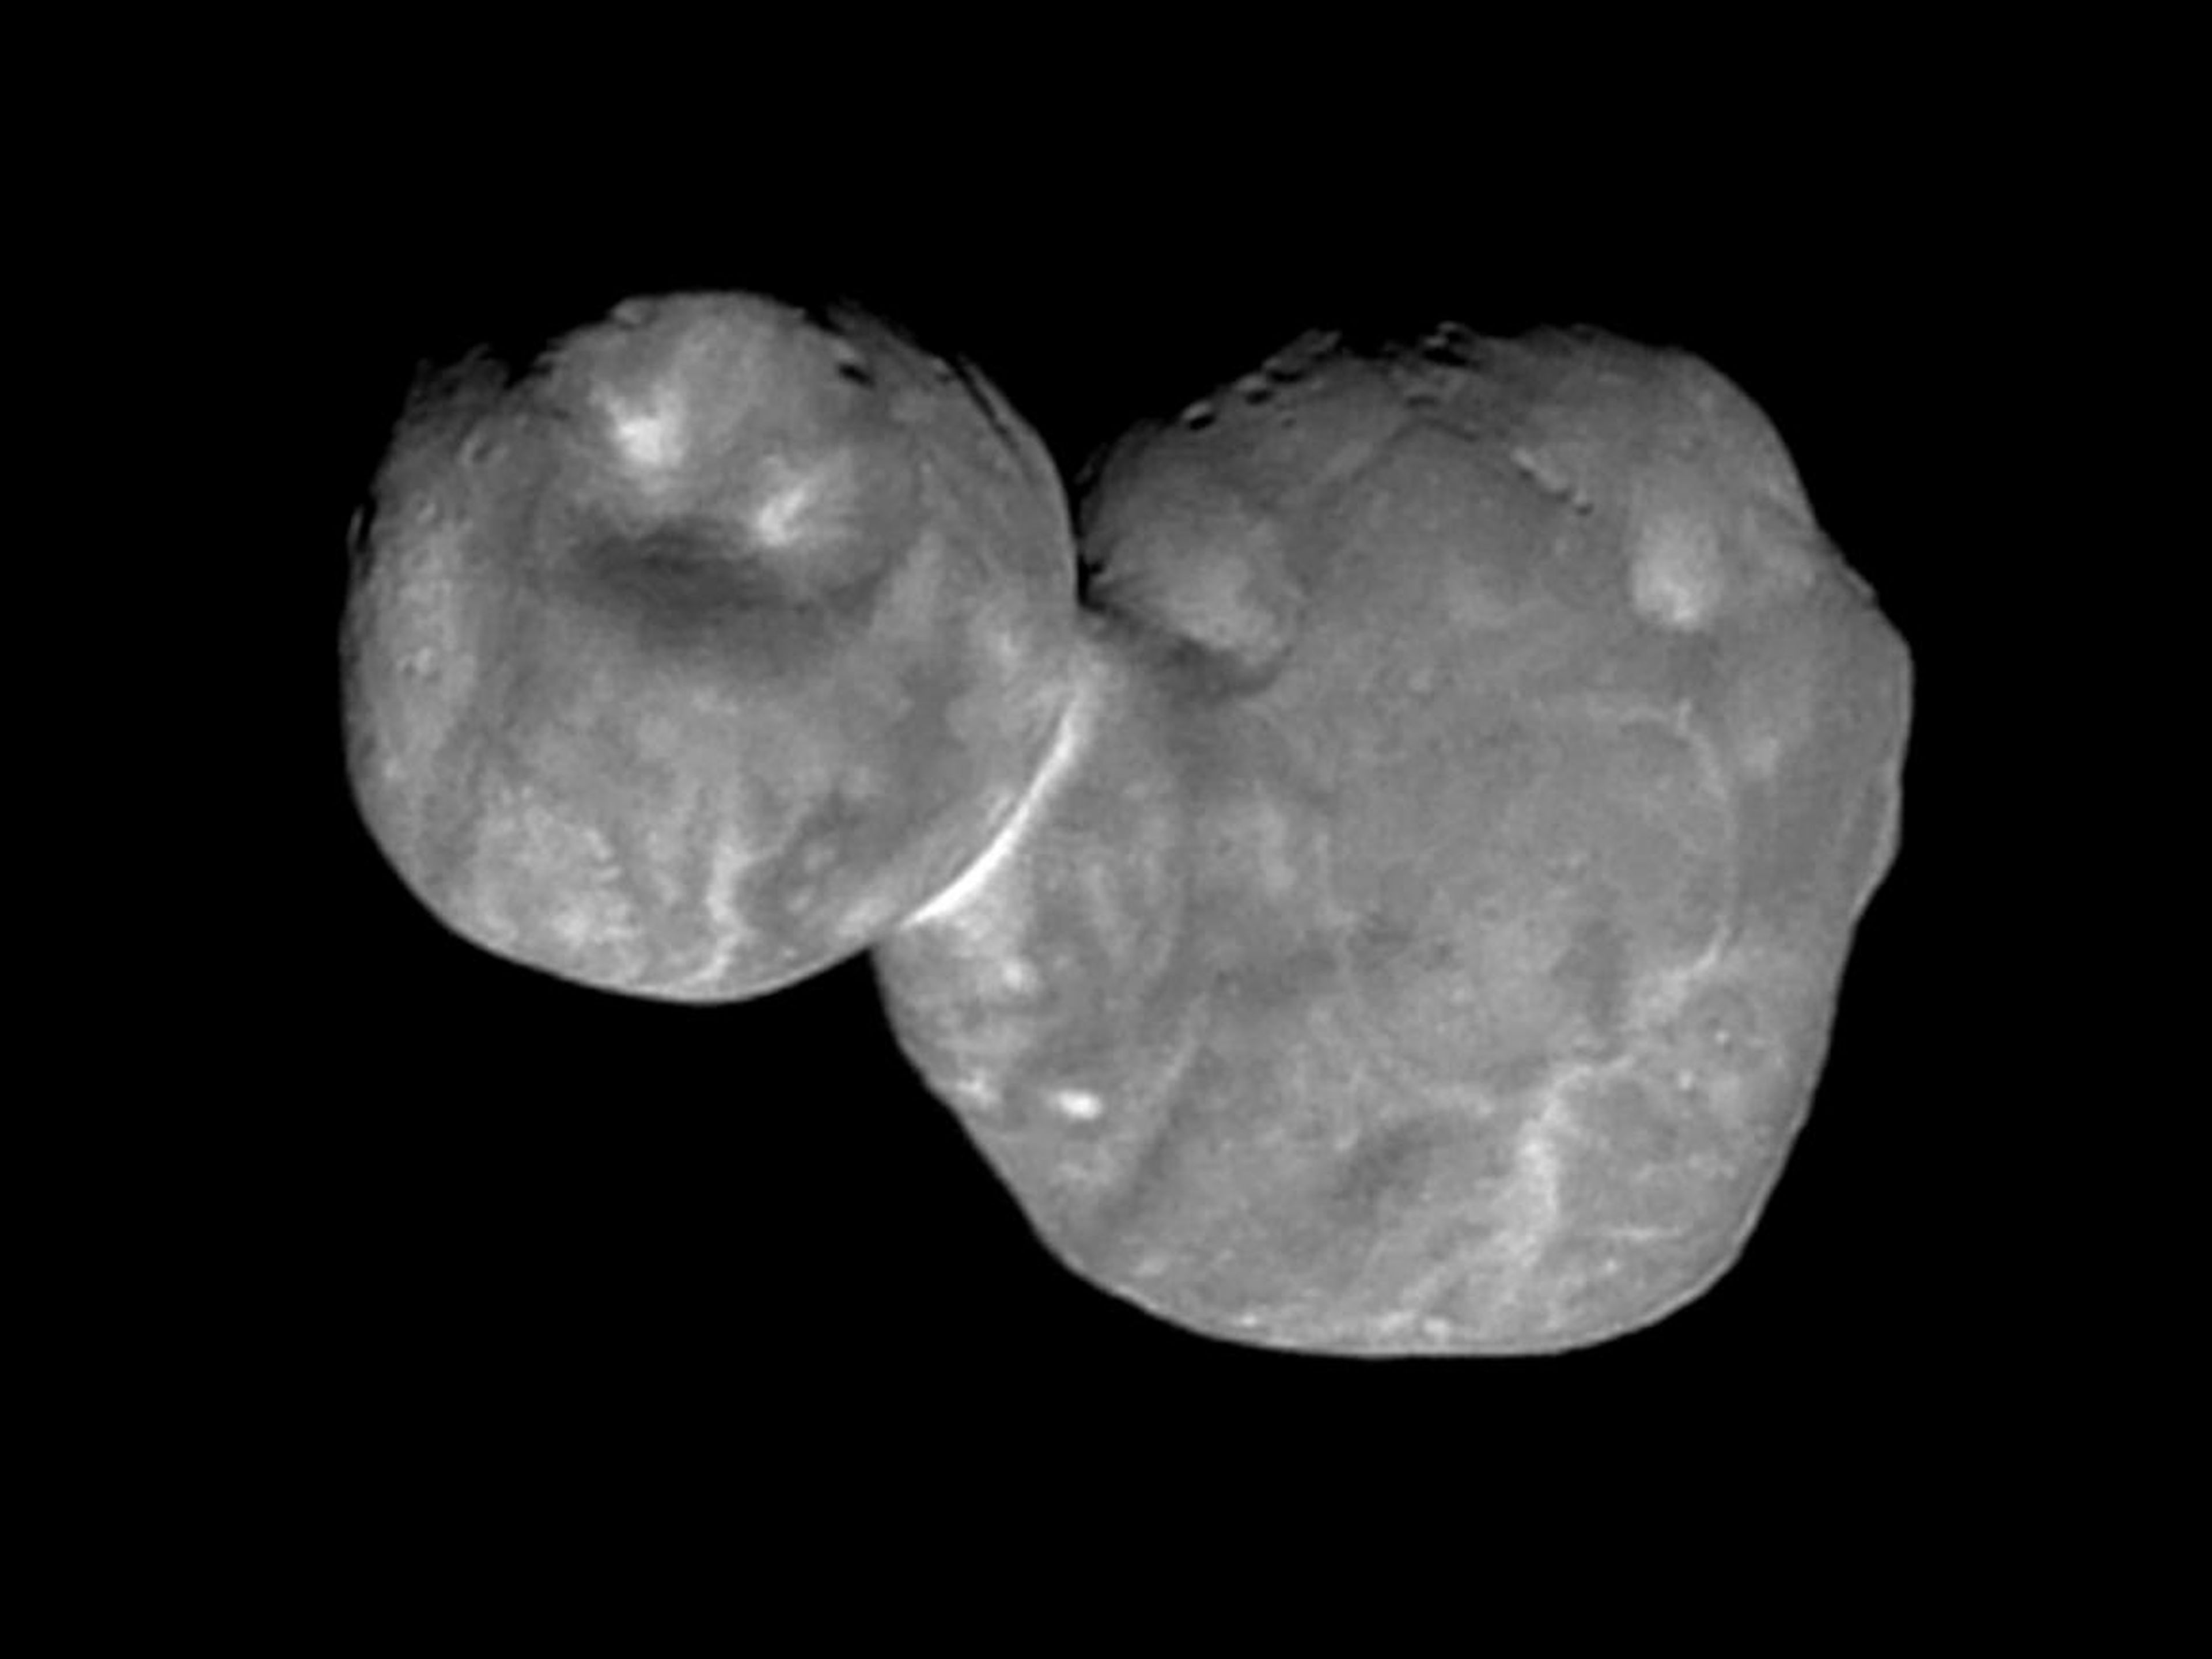 New Horizons took this detailed image of space object MU69 (or "Arrokoth") at 12:26 a.m. EST on January 1, 2019.